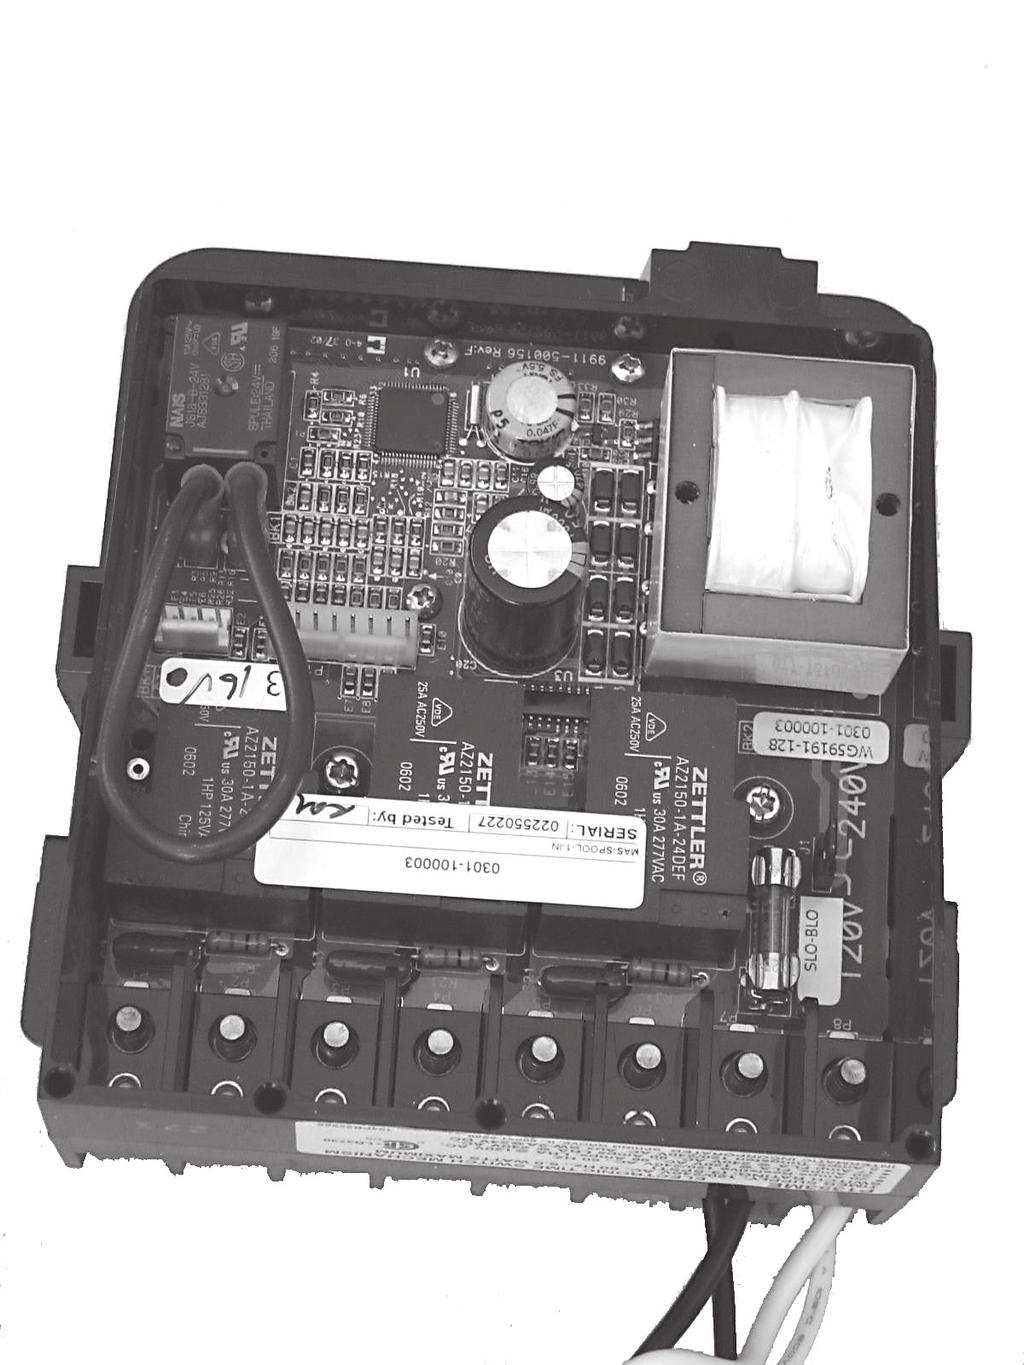 8 I-Wave PE950/PE650 Installation Guide Check Out and Troubleshooting Connecting Wiring Plug the Panel-Mounted Transceiver wires into the mechanism(s) that make up the installation.